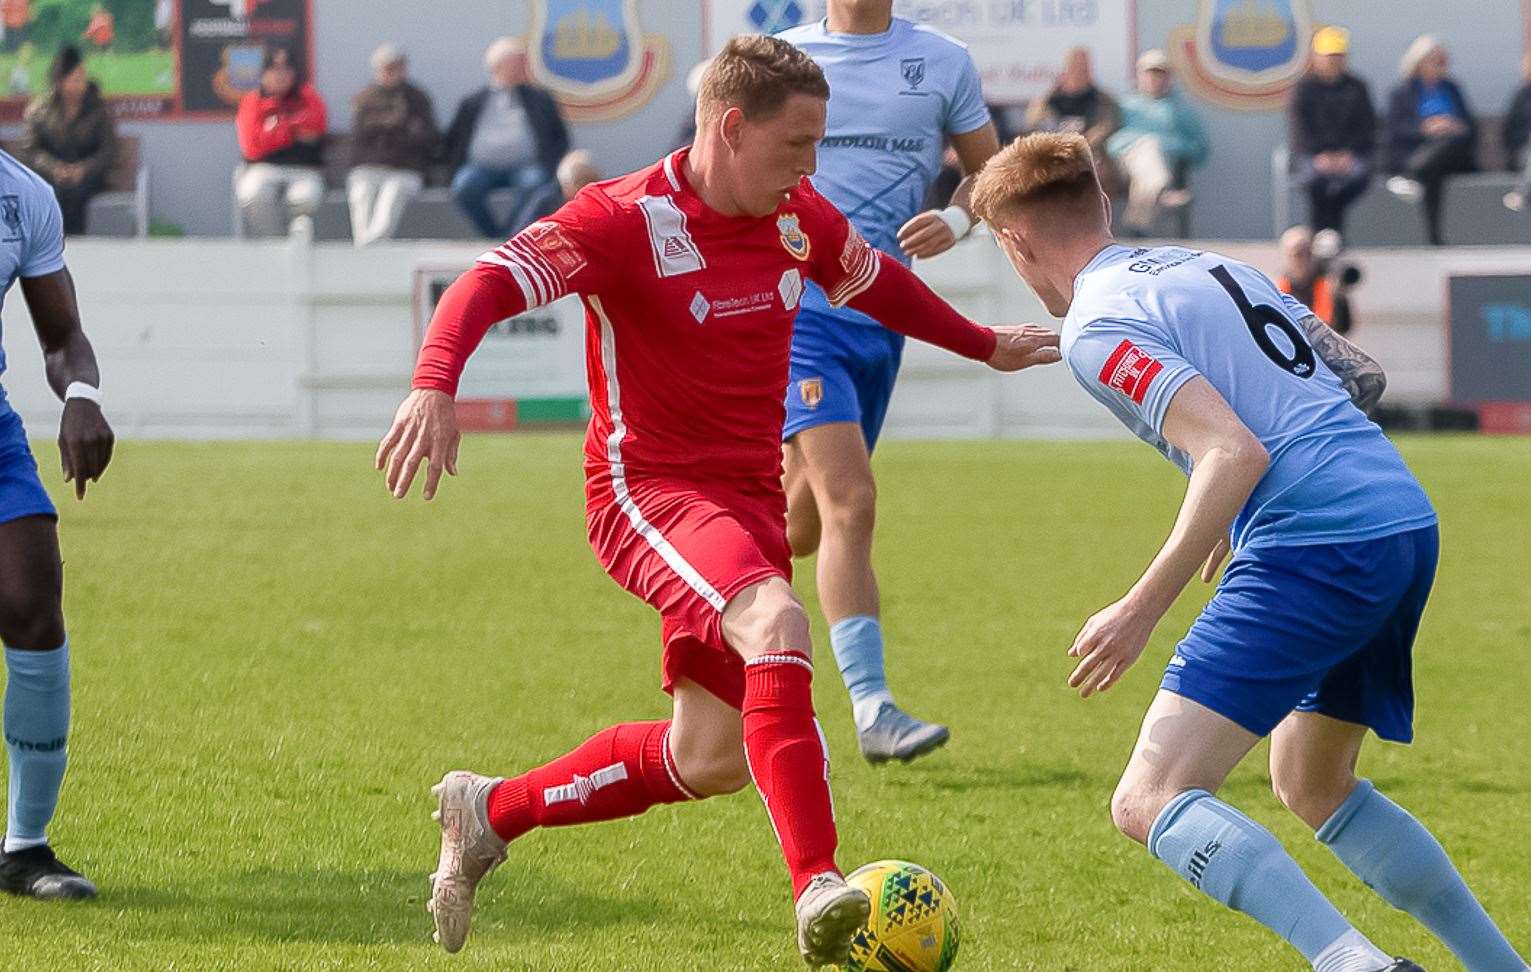 Whitstable striker Charlie Heatley turns inside Liam Hendy during Whitstable's loss to Lancing last Saturday. Picture: Les Biggs